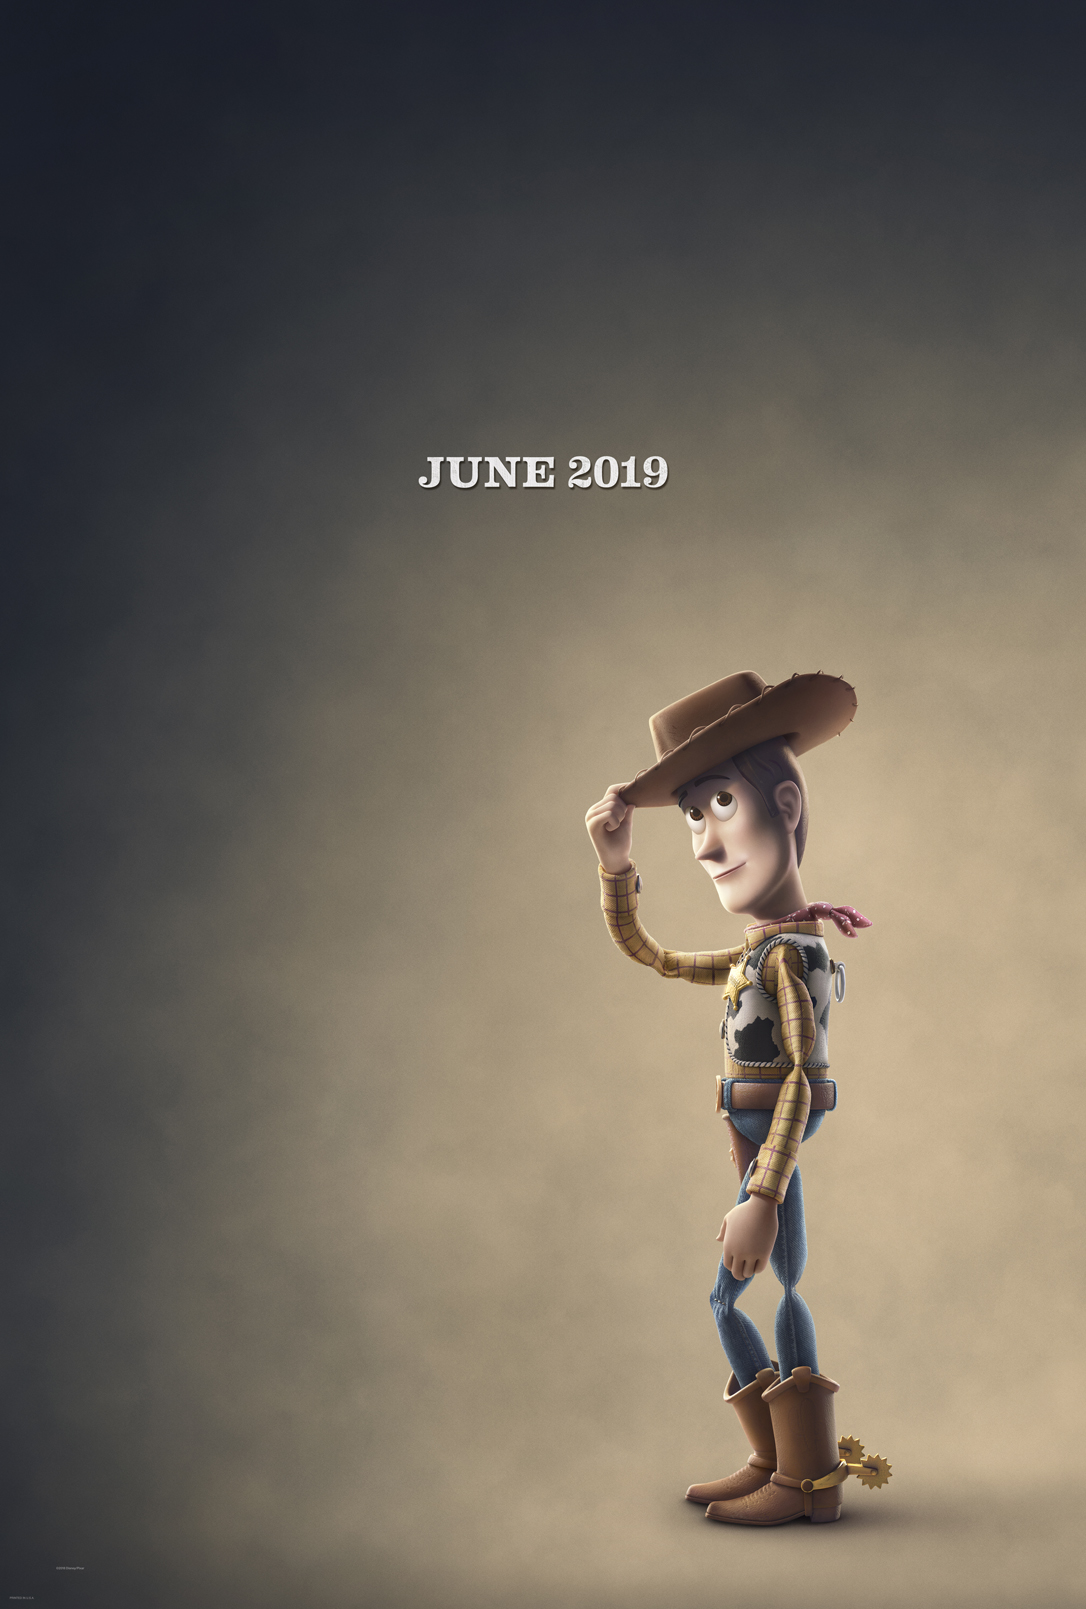 the-first-trailer-for-toy-story-4-has-arrived-and-it-introduces-us-to-forky1